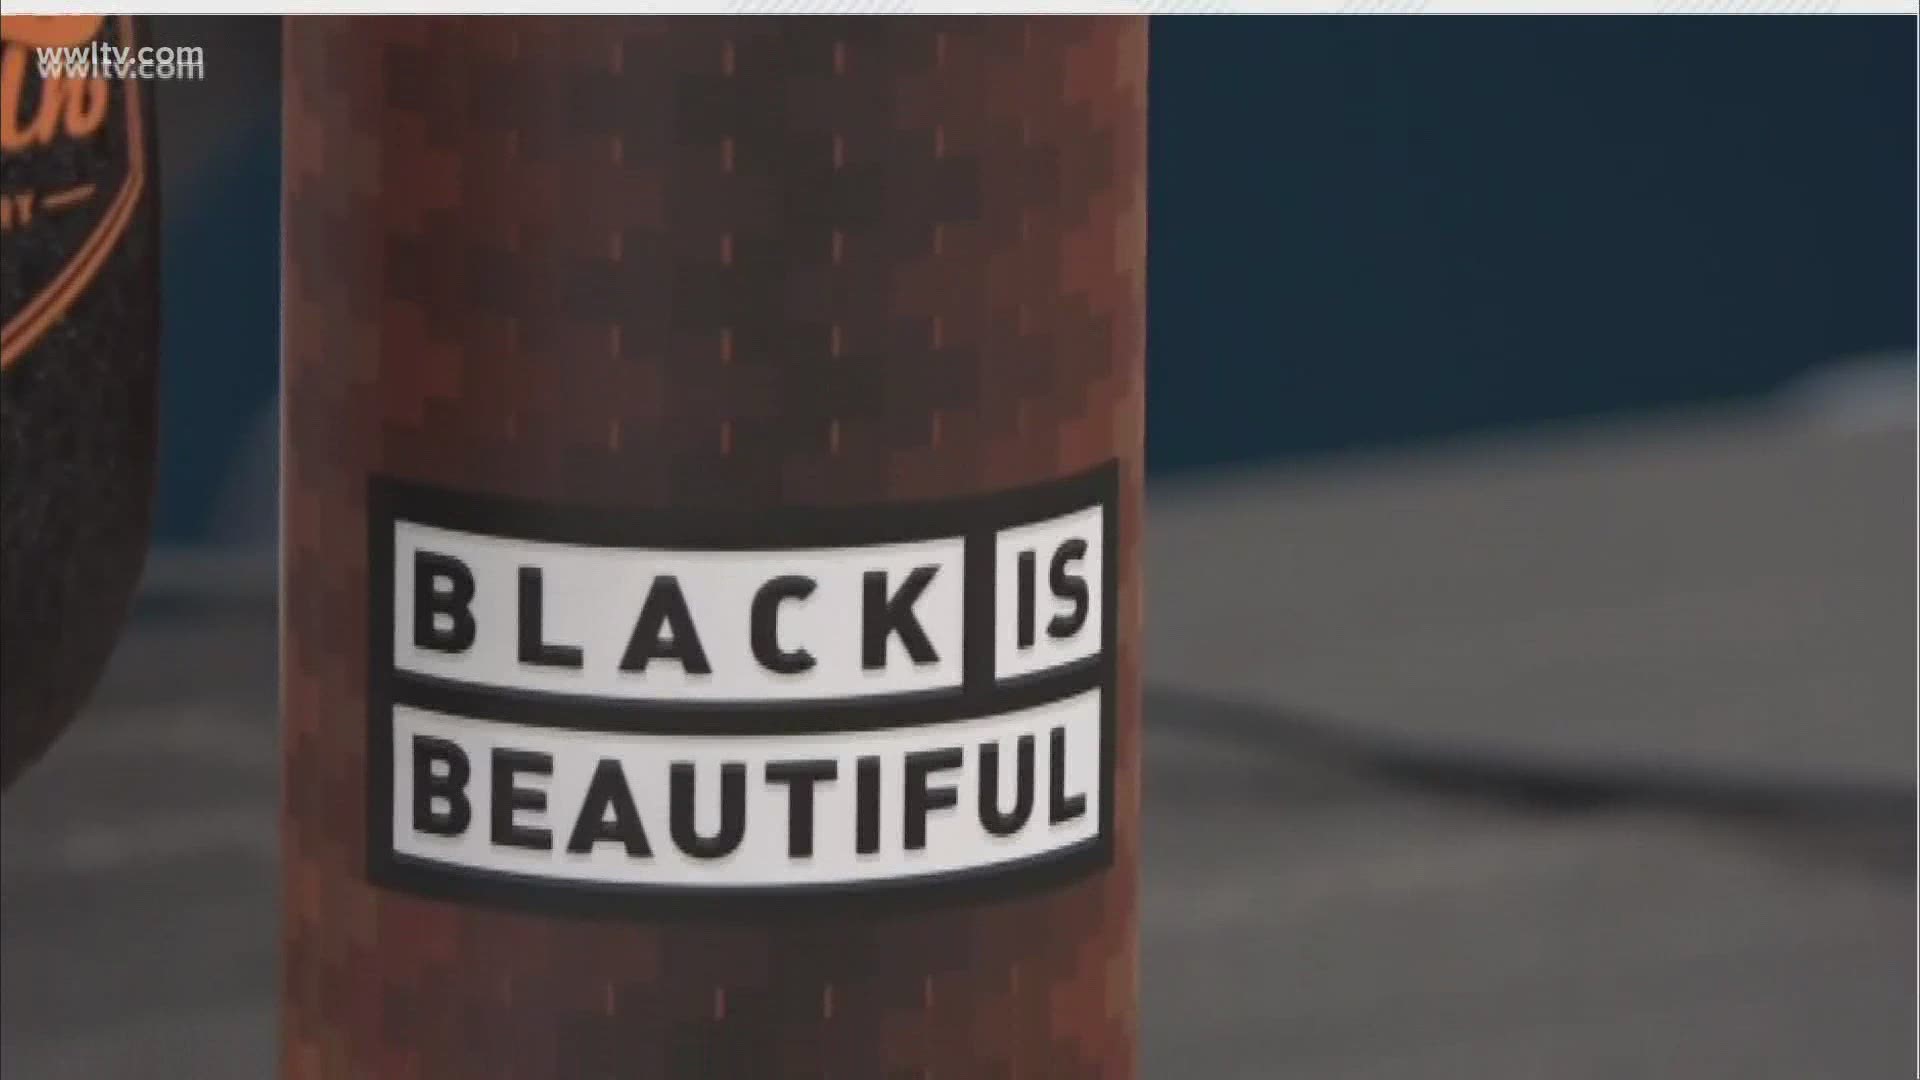 Some local breweries are brewing up special batches of beer to raise money and awareness for Black lives causes.